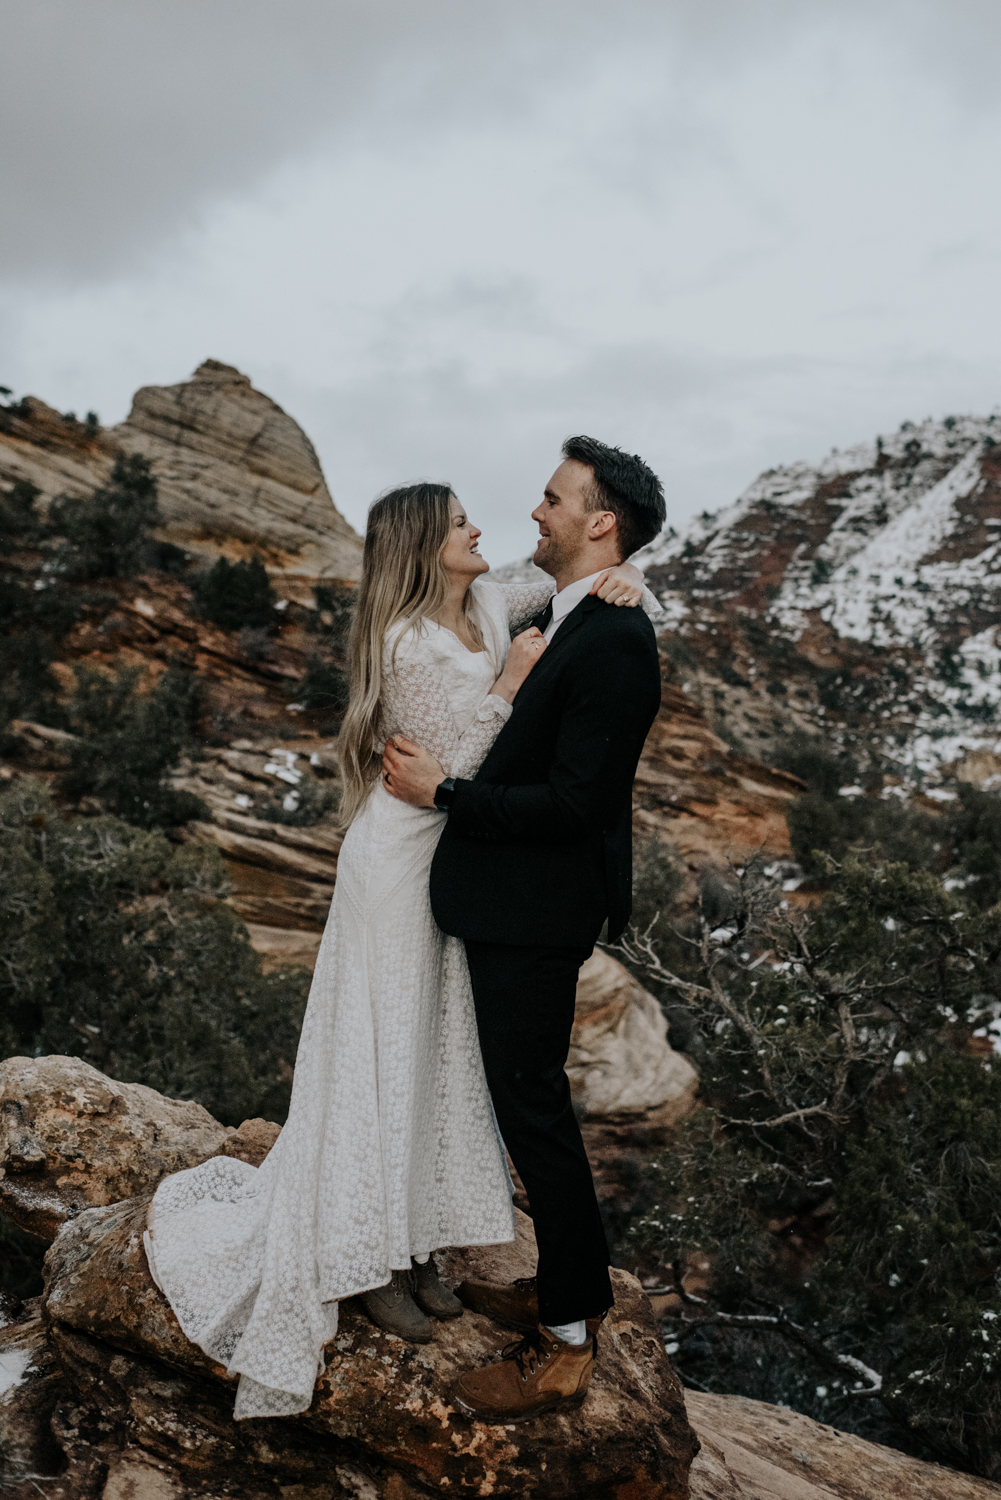  Best Location for Couples photos at Zion Park 